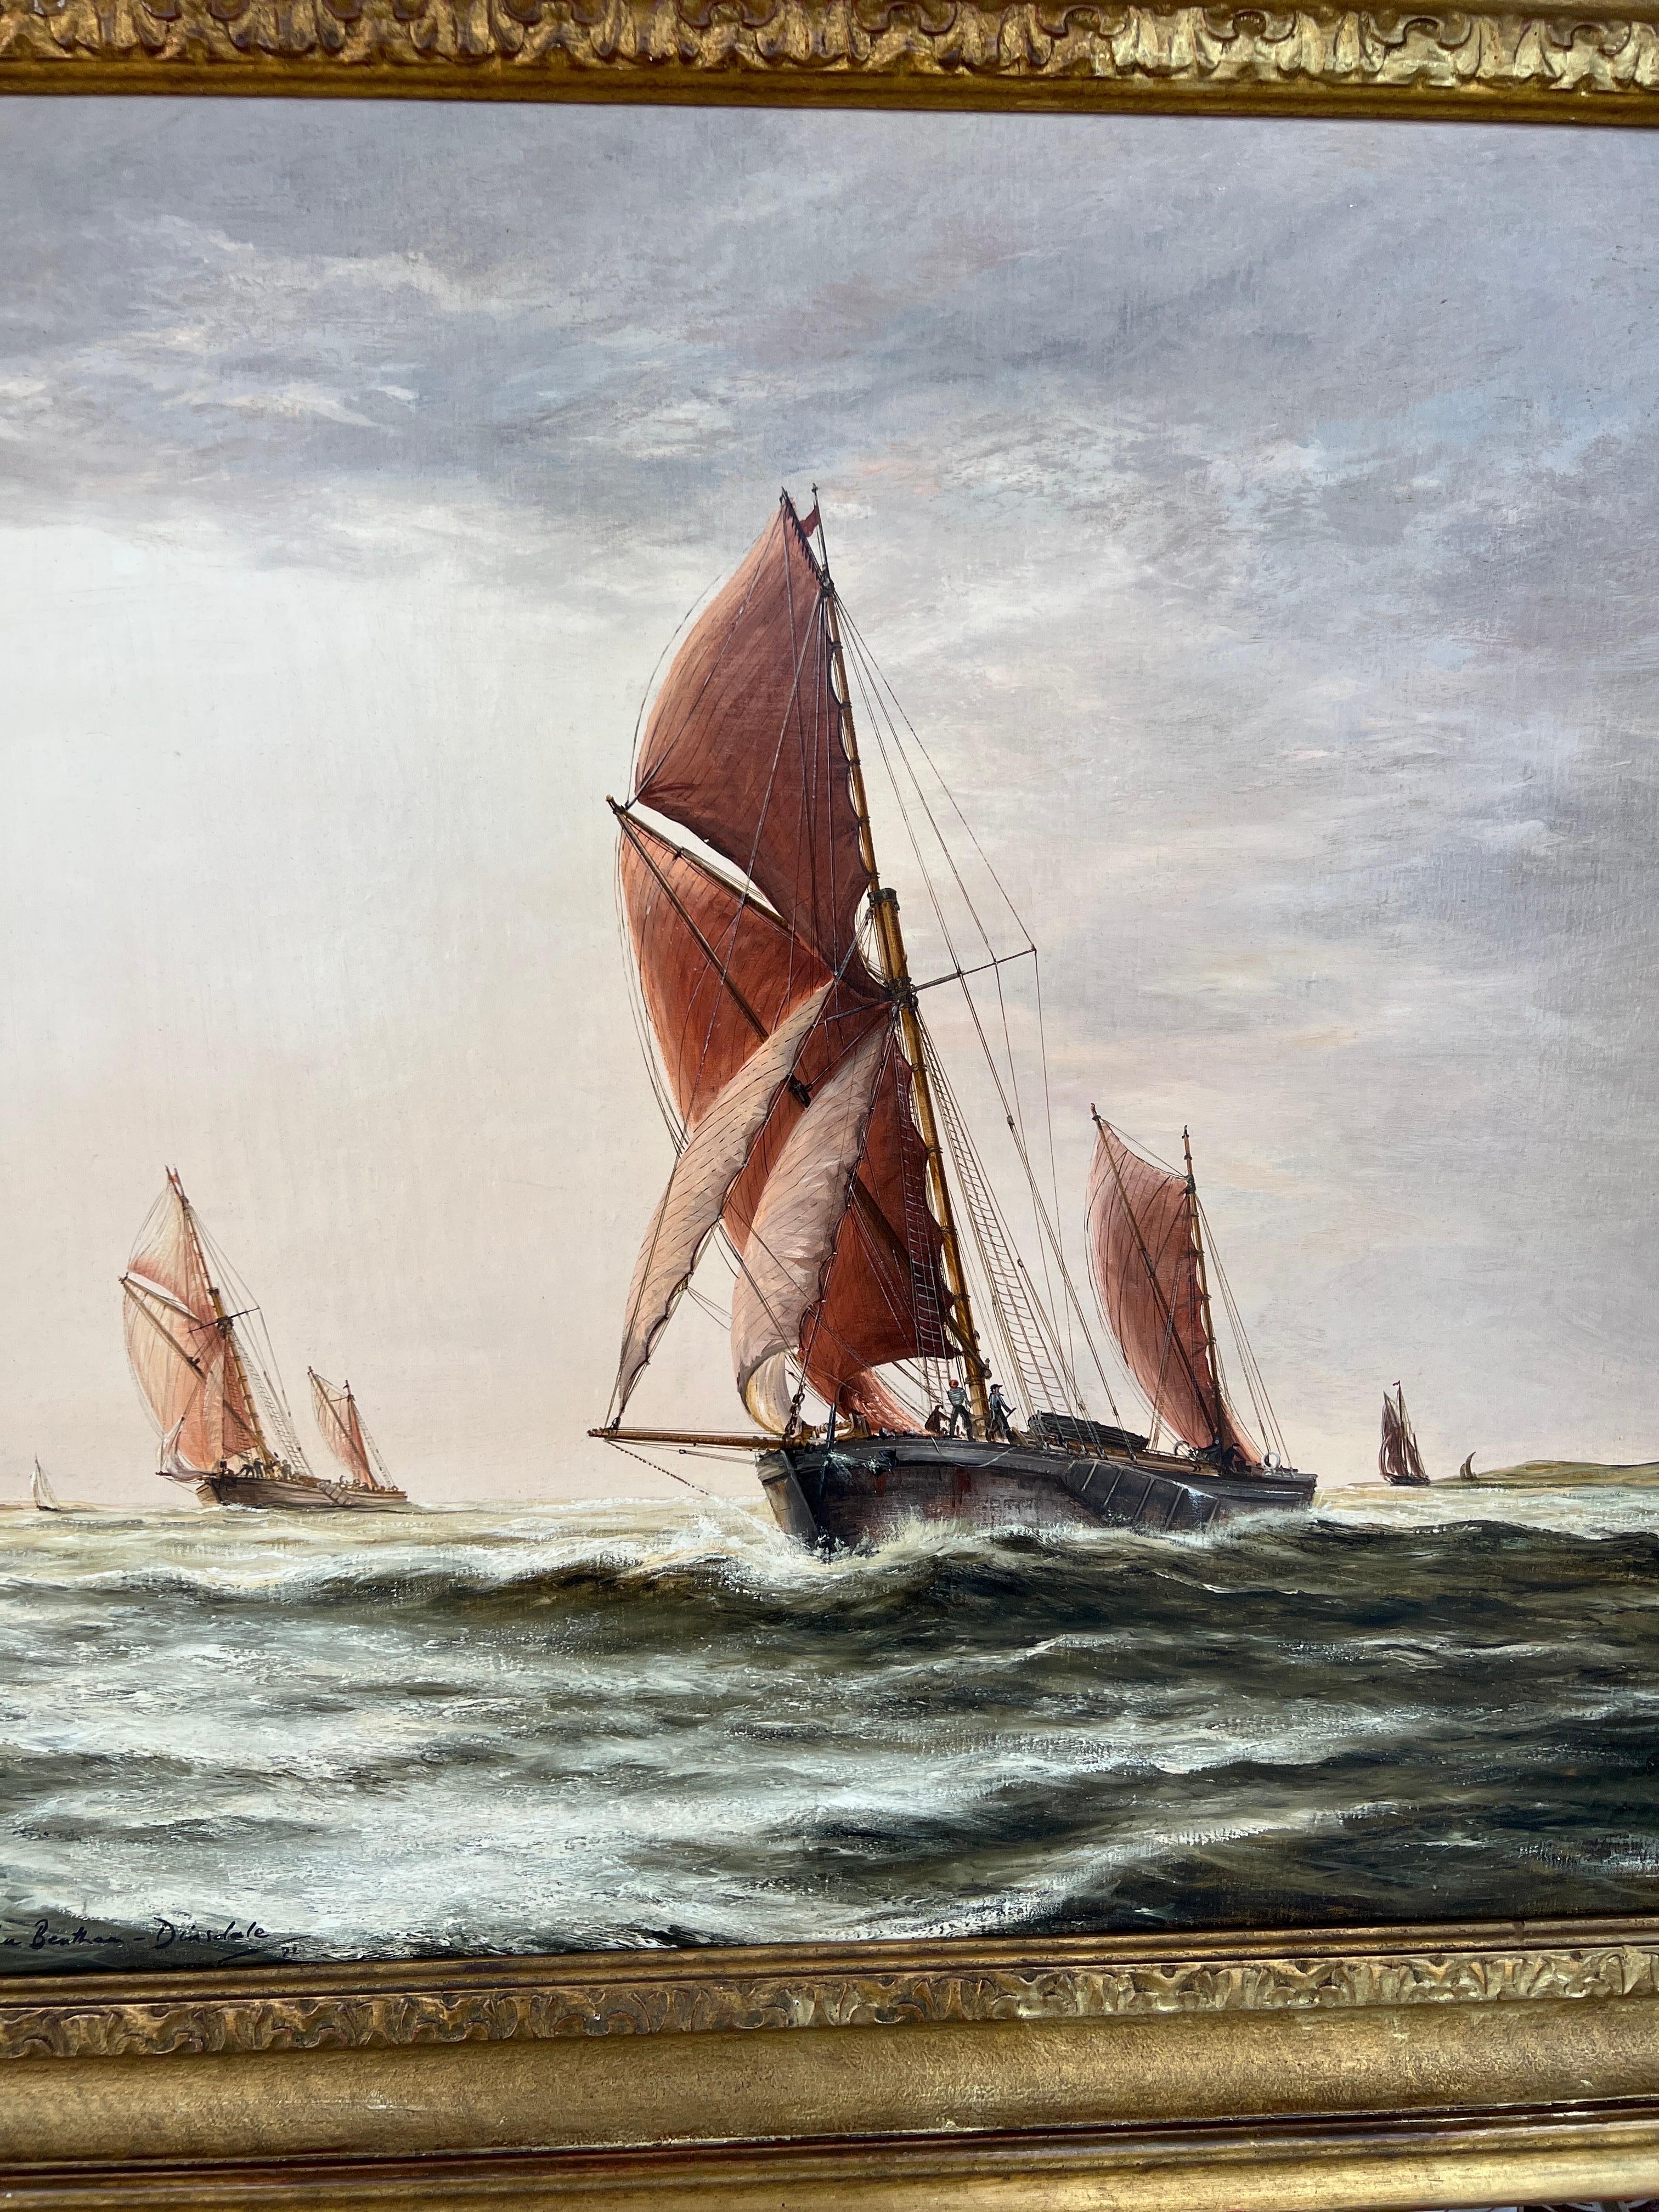 John Bentham-Dinsdale (British, 1927-2008), circa 1972.
Dinsdale painted the sea and great ships of the era when “Britannia ruled the waves” with her fleets of clipper and fighting ships whose huge white sails took men across the seas of the world.